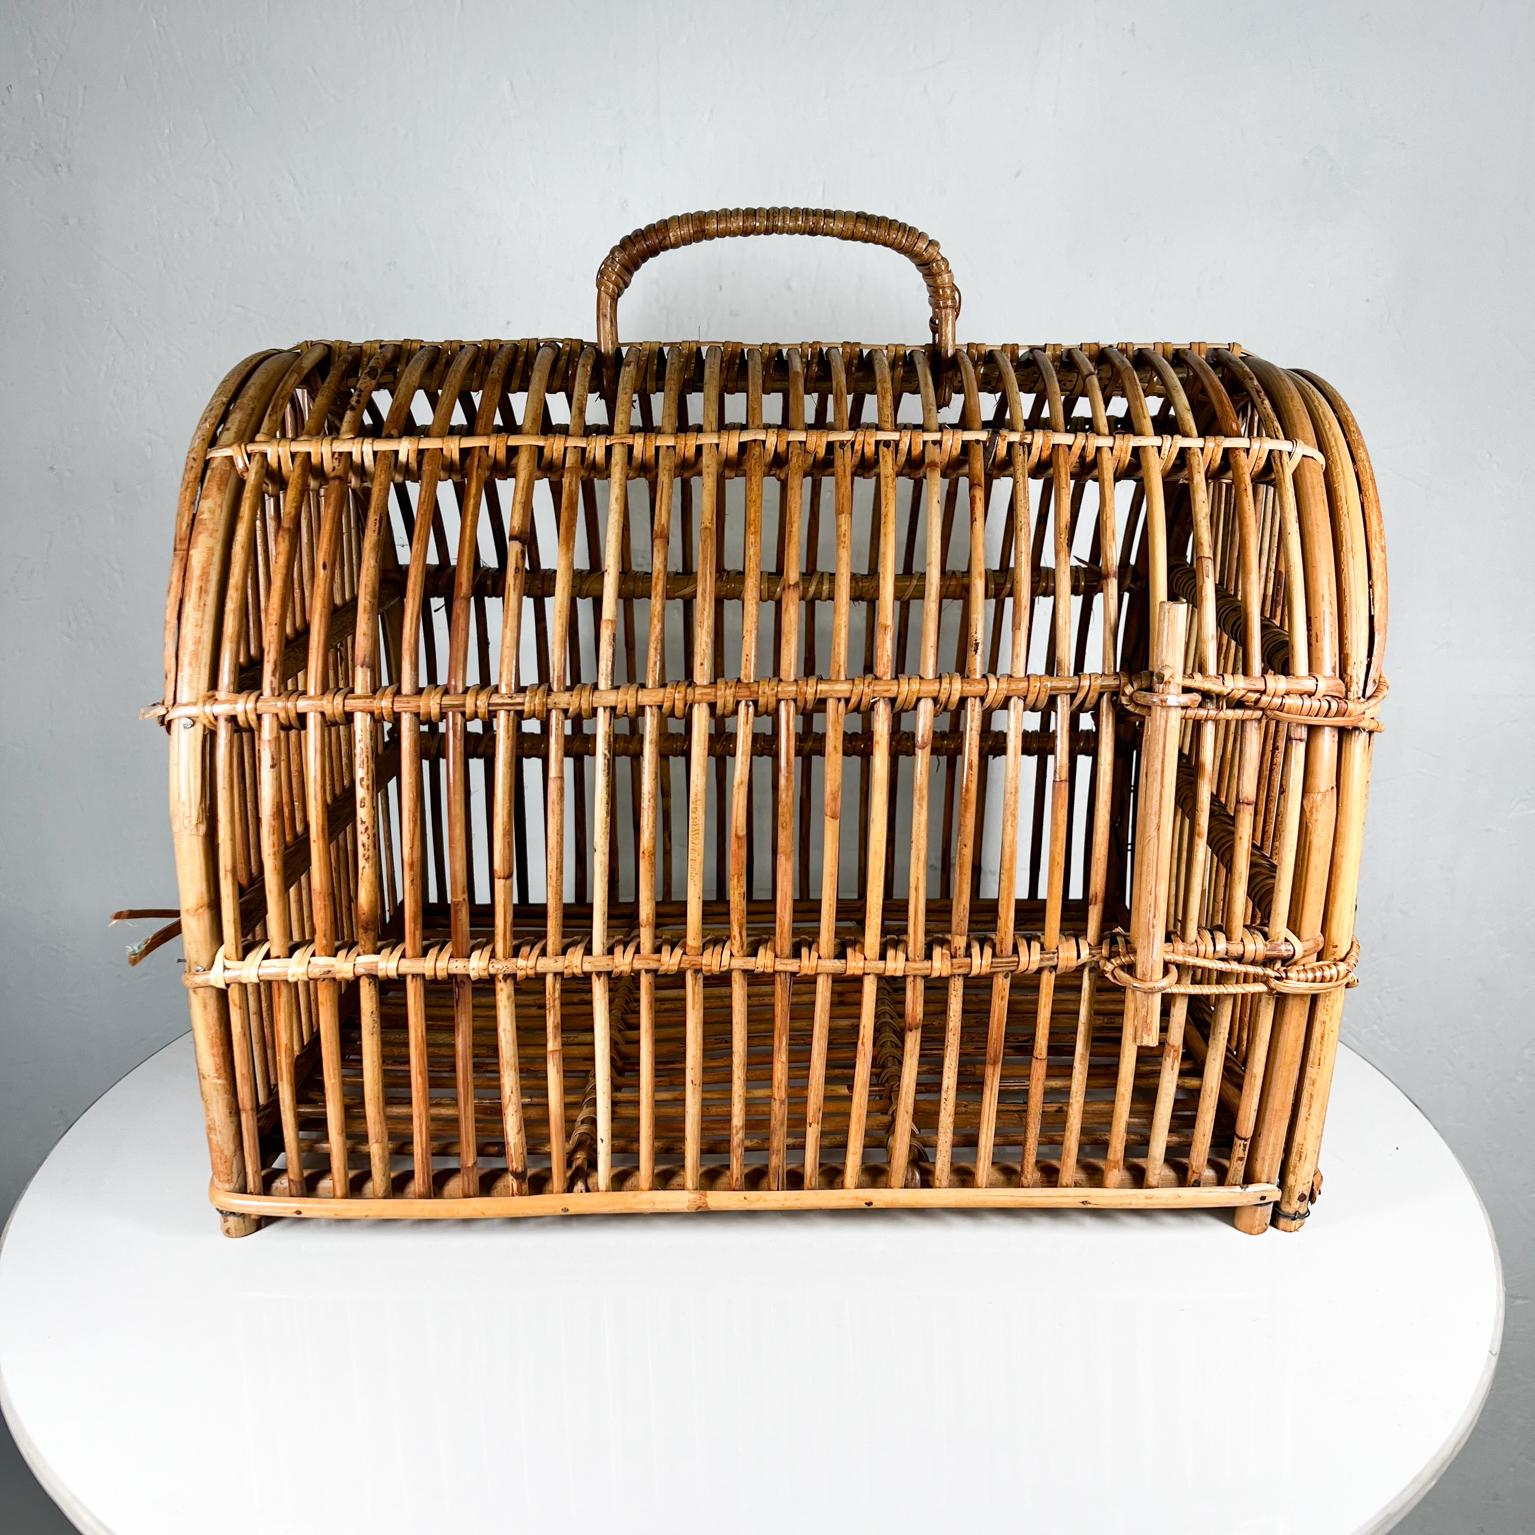 1940s Handmade Vintage Bent Bamboo Animal Carrier Cage
17 d x 12.5 w x 14 h
Original unrestored vintage condition.
Review images listed please.